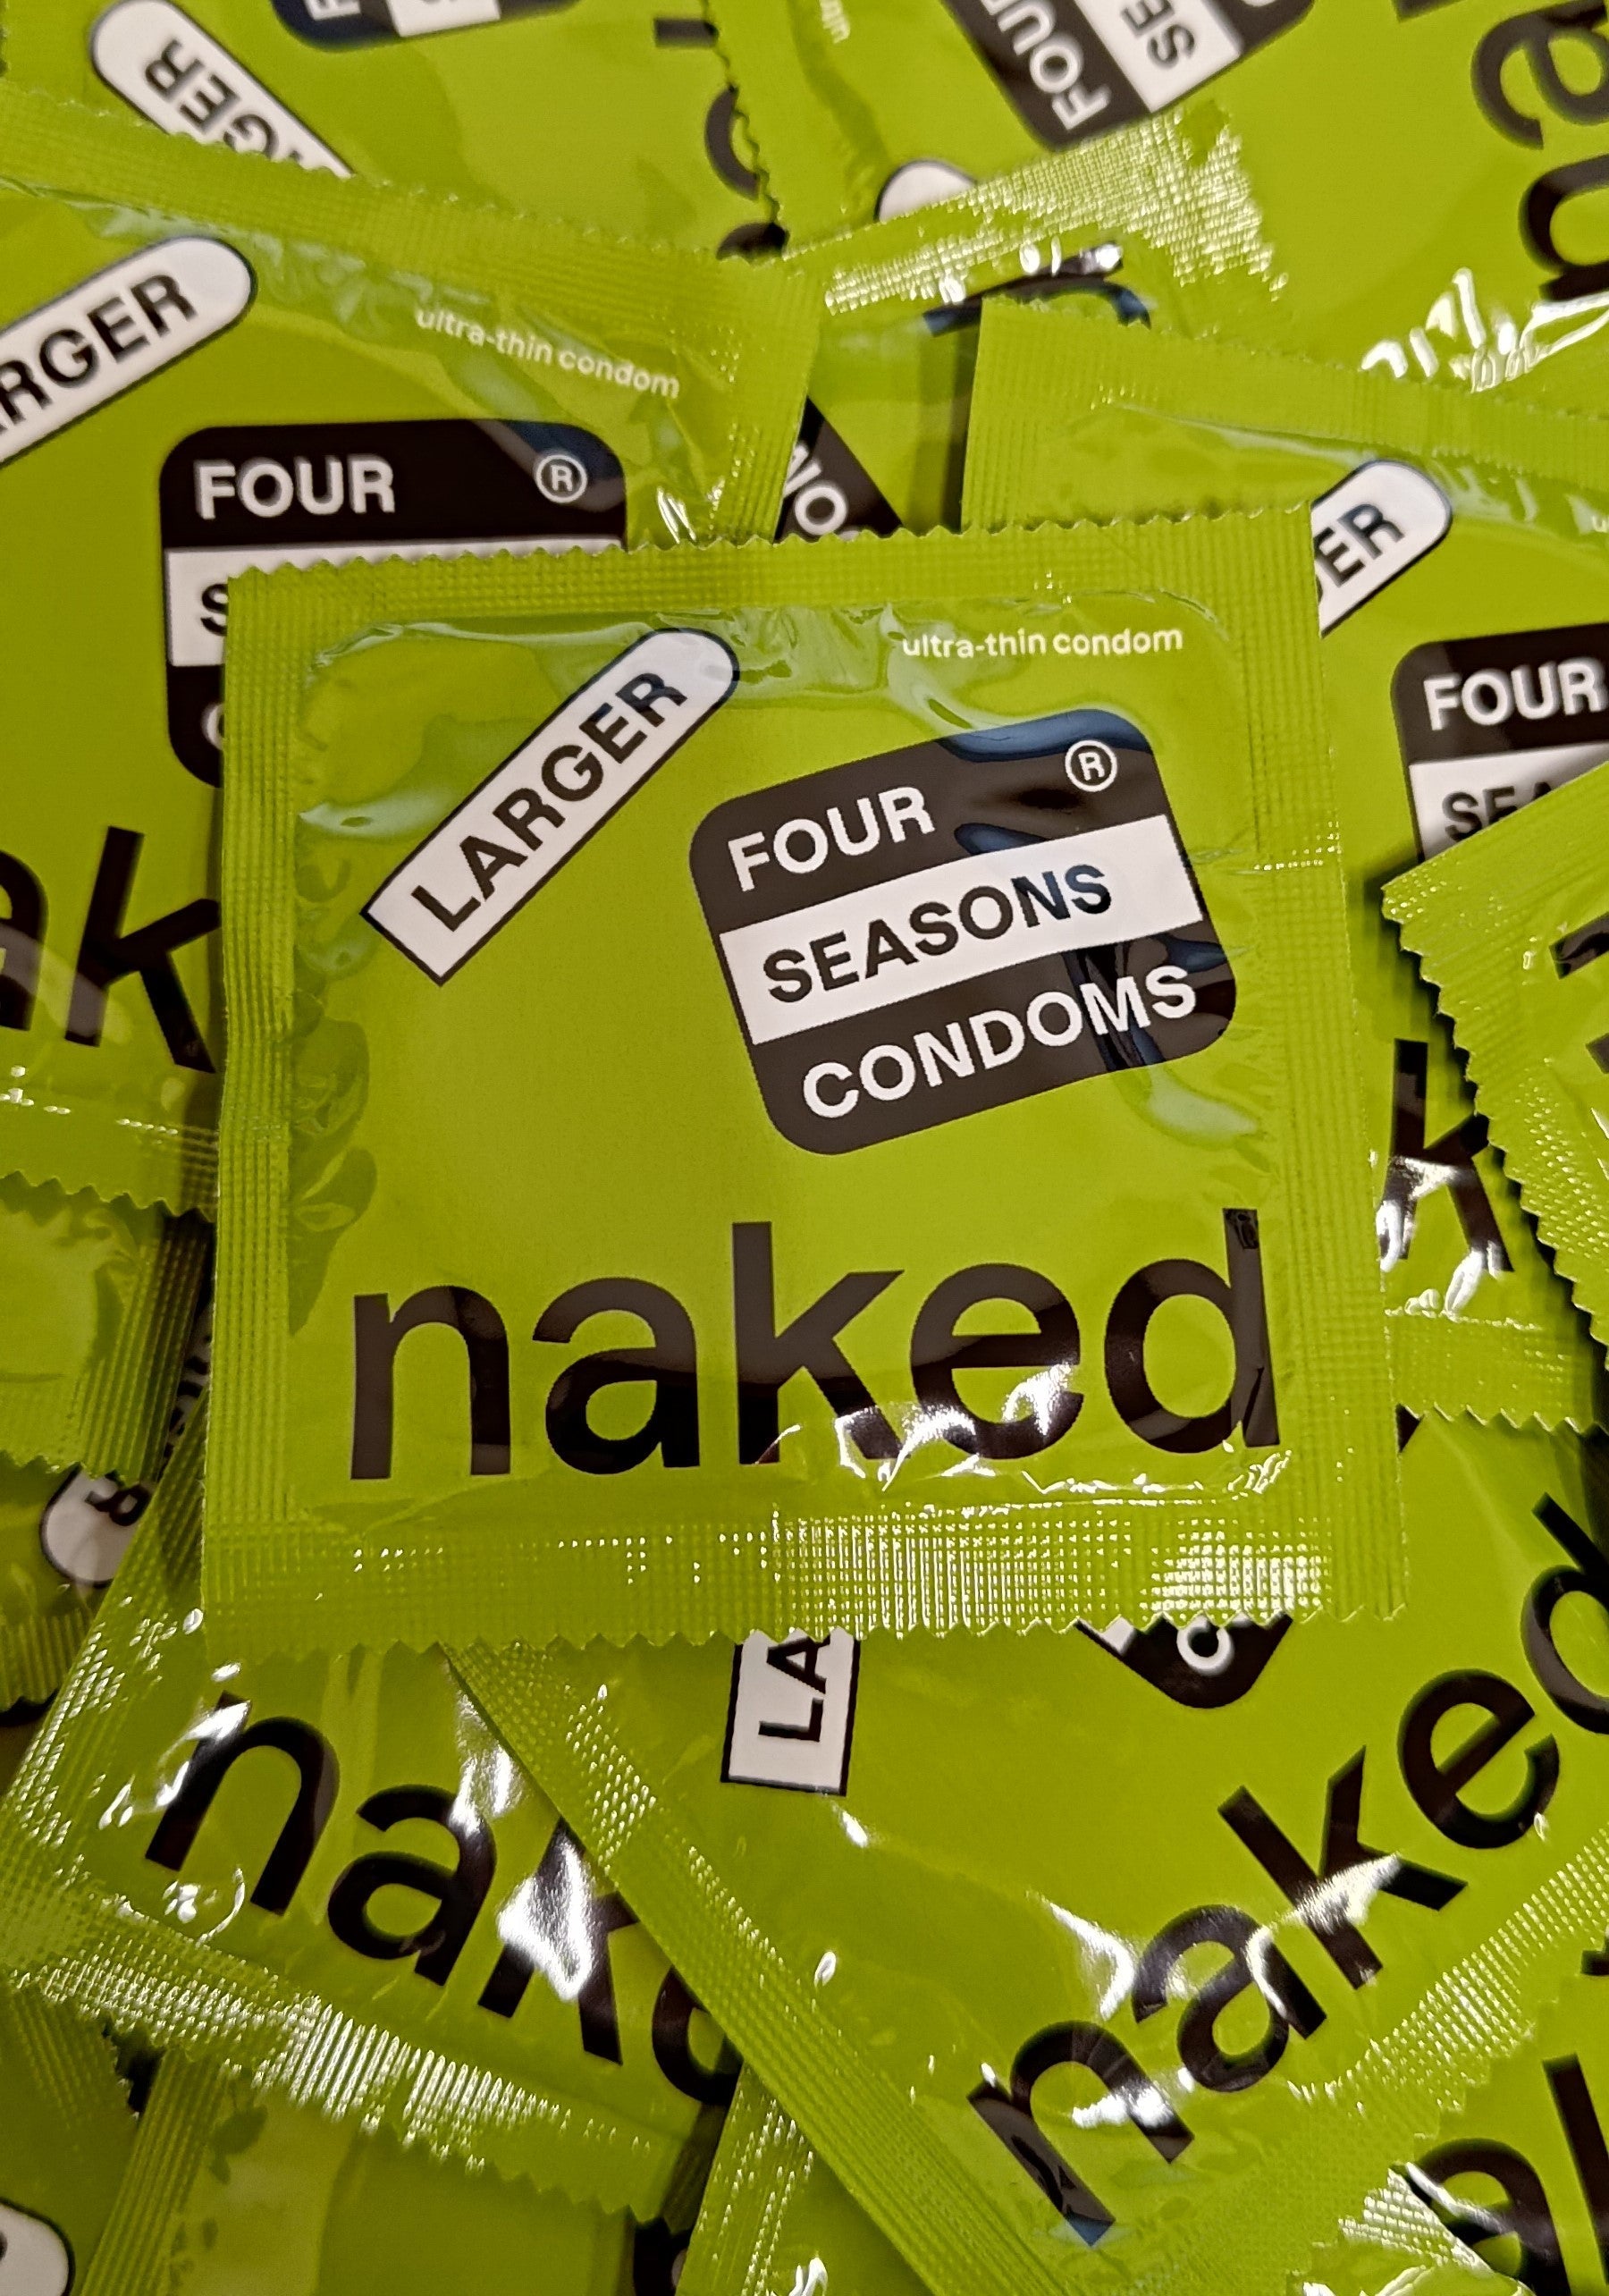 Four Seasons Naked Larger 36 Condoms